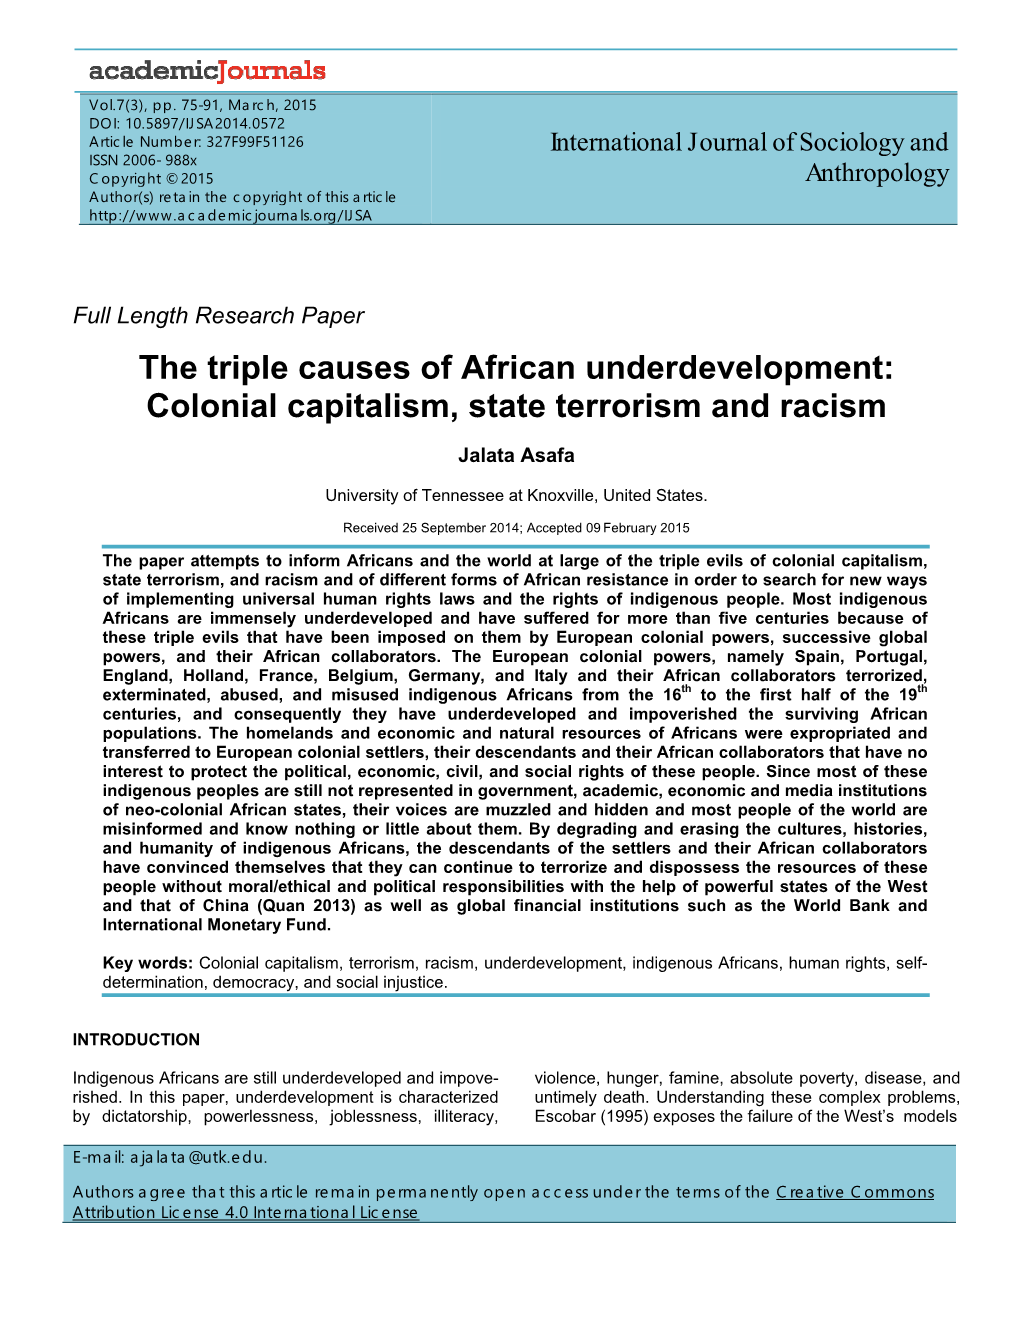 The Triple Causes of African Underdevelopment: Colonial Capitalism, State Terrorism and Racism